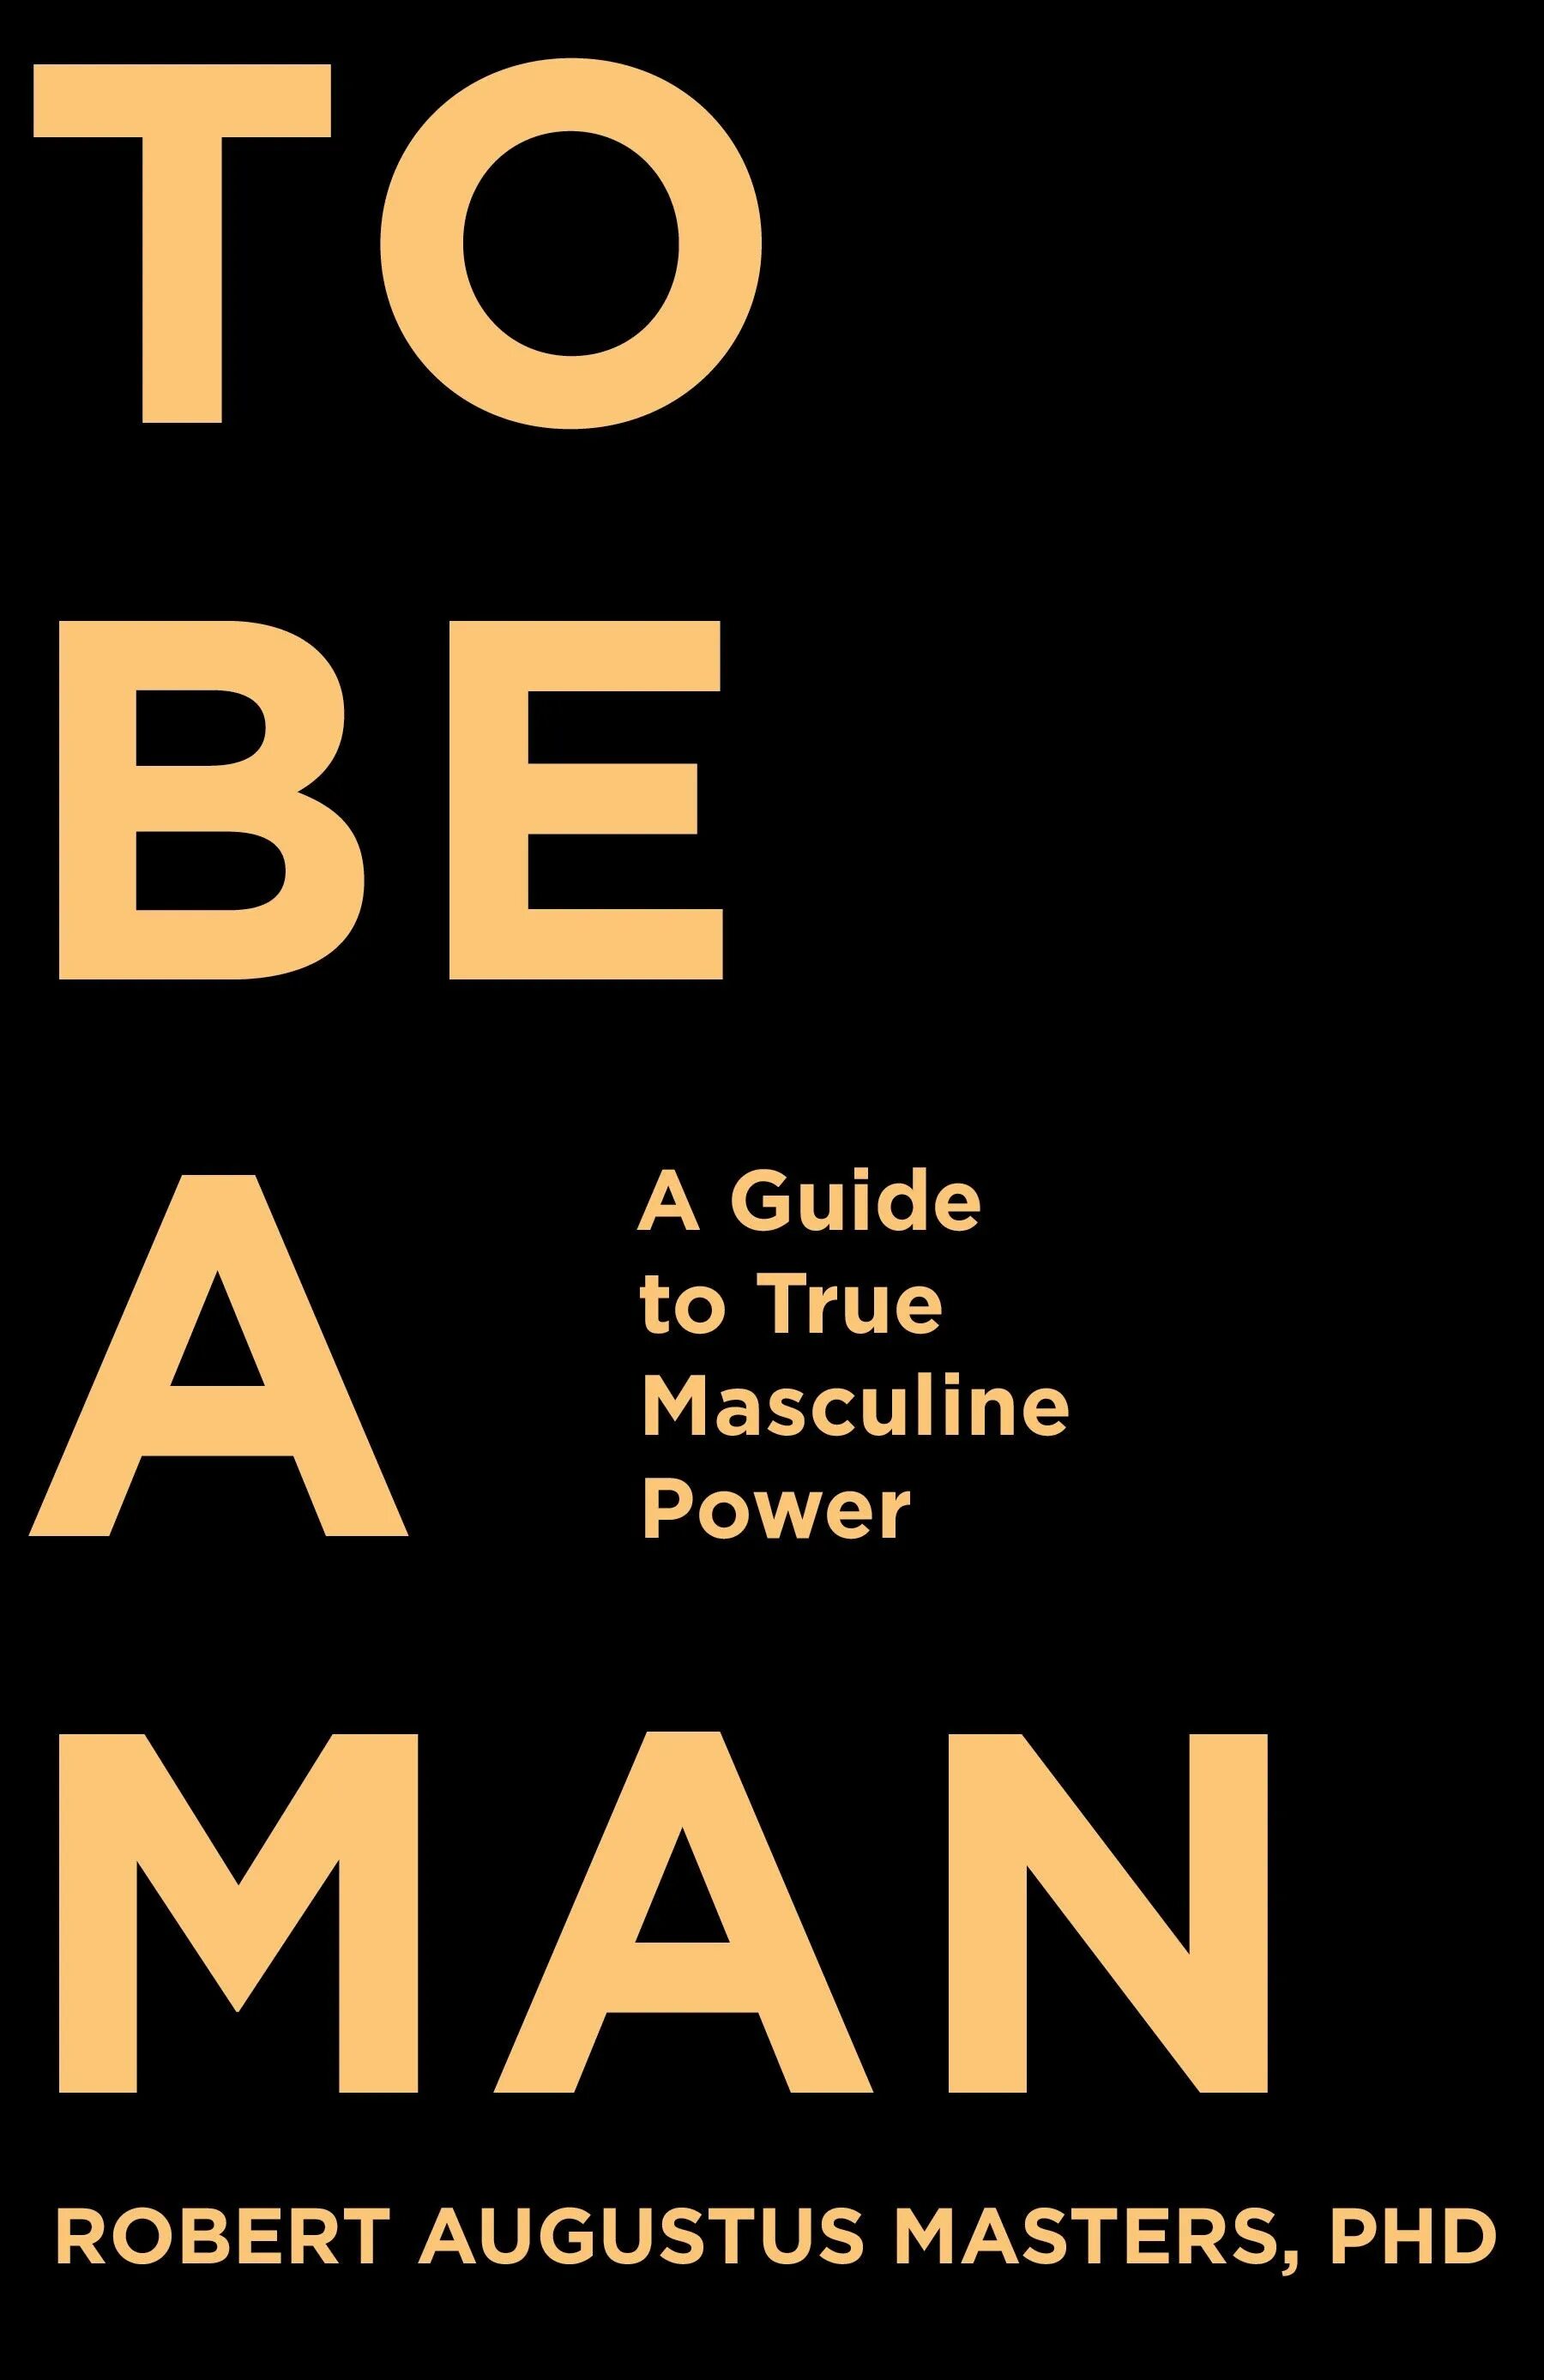 True guide. Be a man.